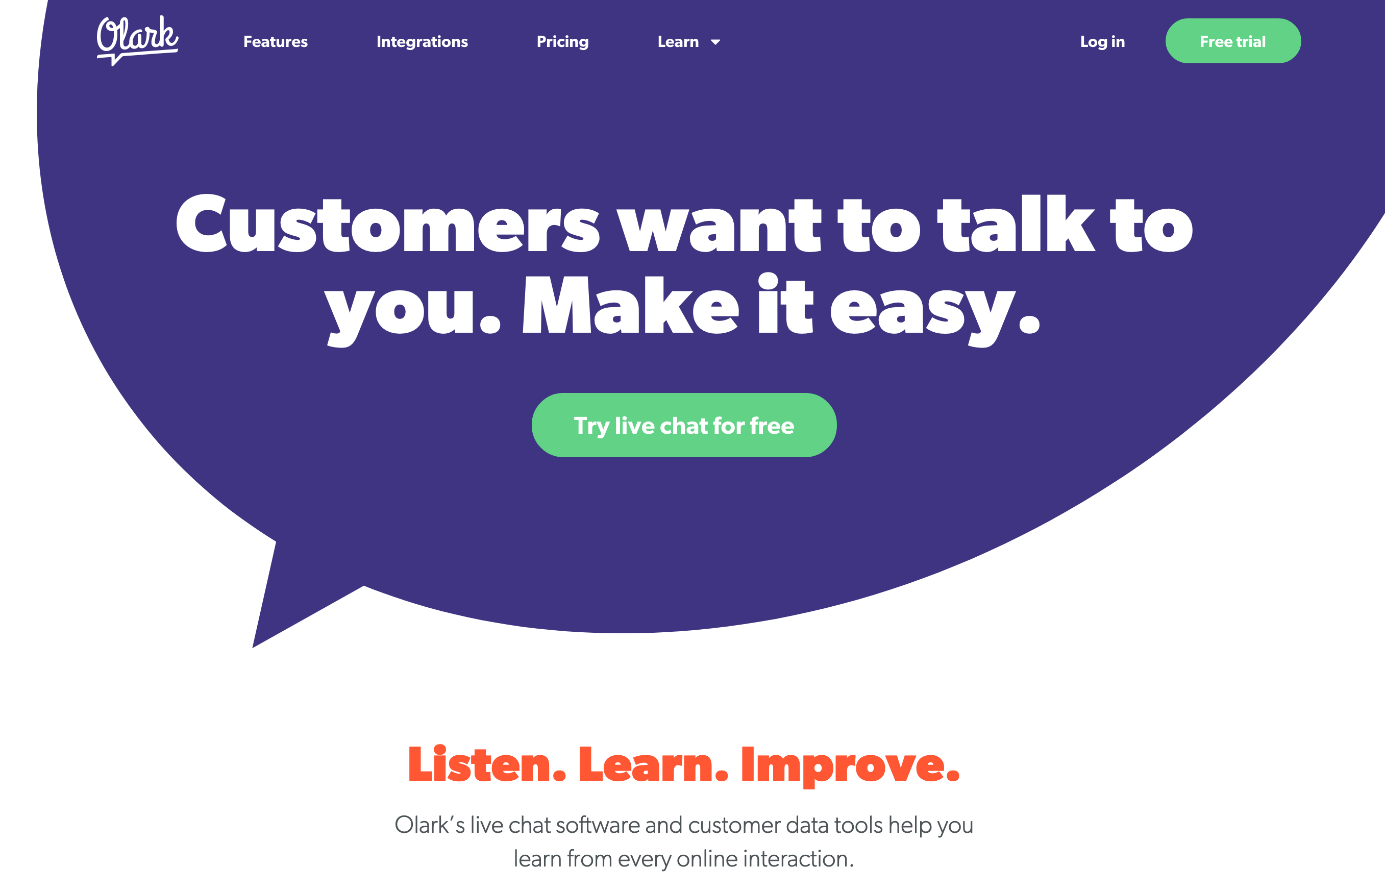 Homepage of Olark, which offers its own chat software